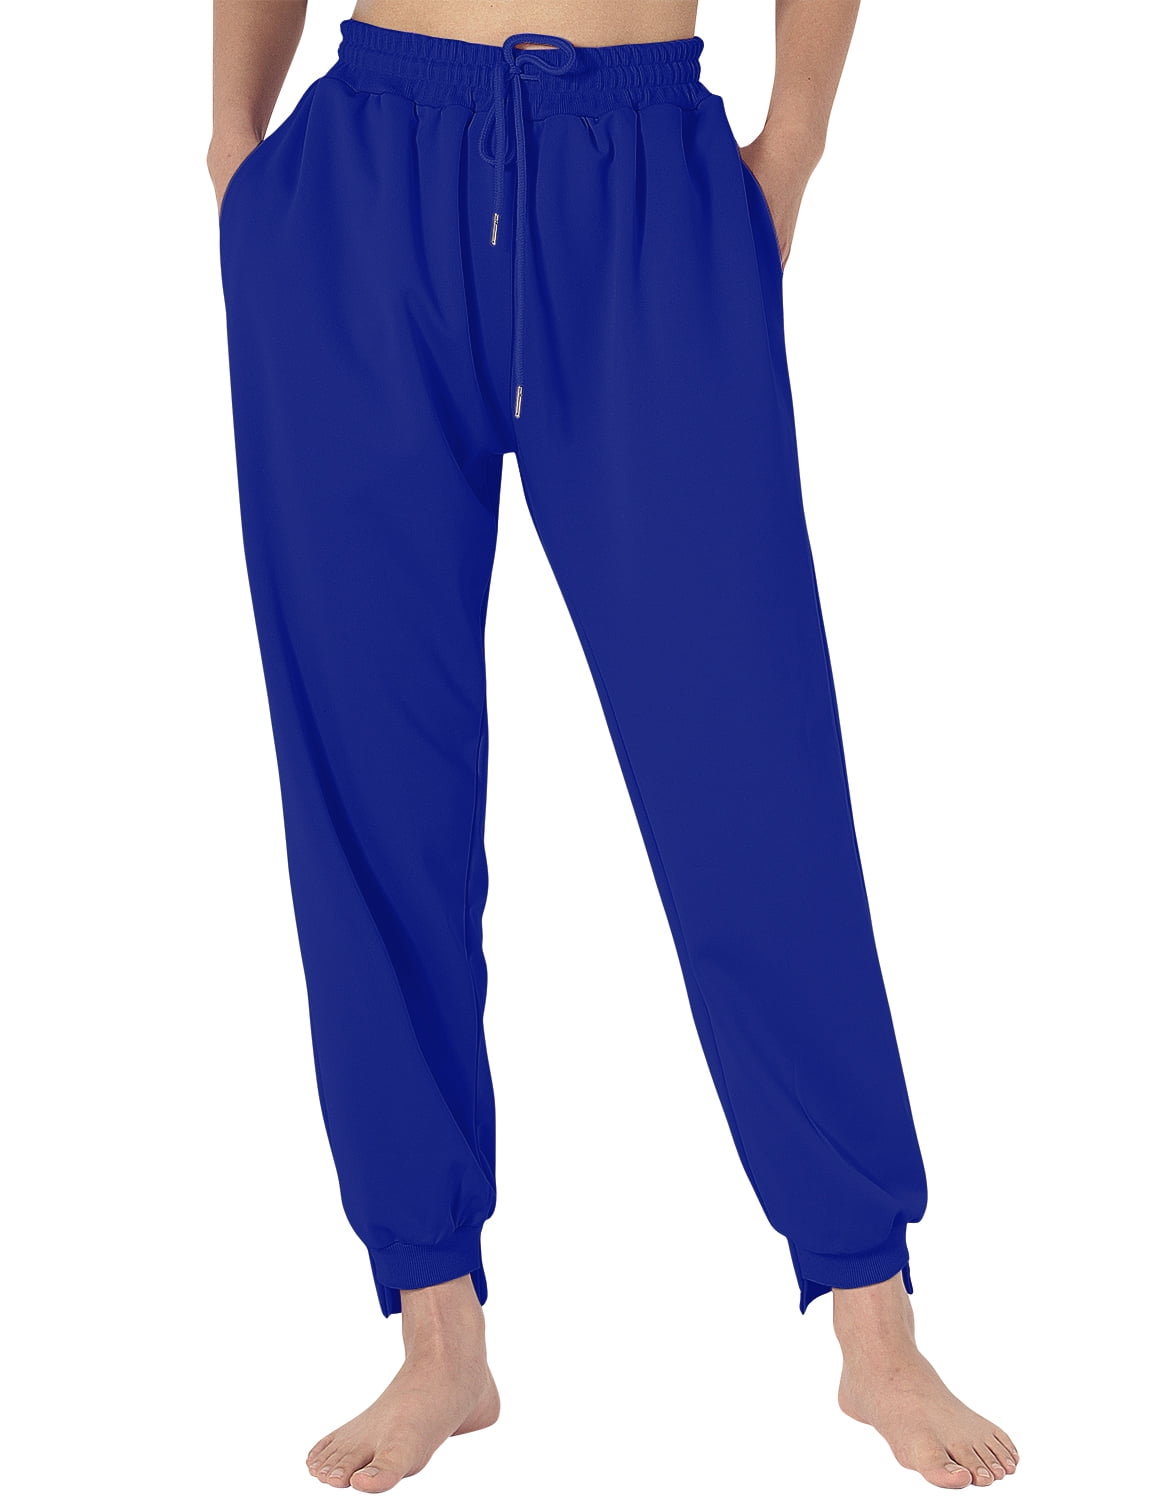 Winter Womens Track Pants - Buy Winter Womens Track Pants Online at Best  Prices In India | Flipkart.com